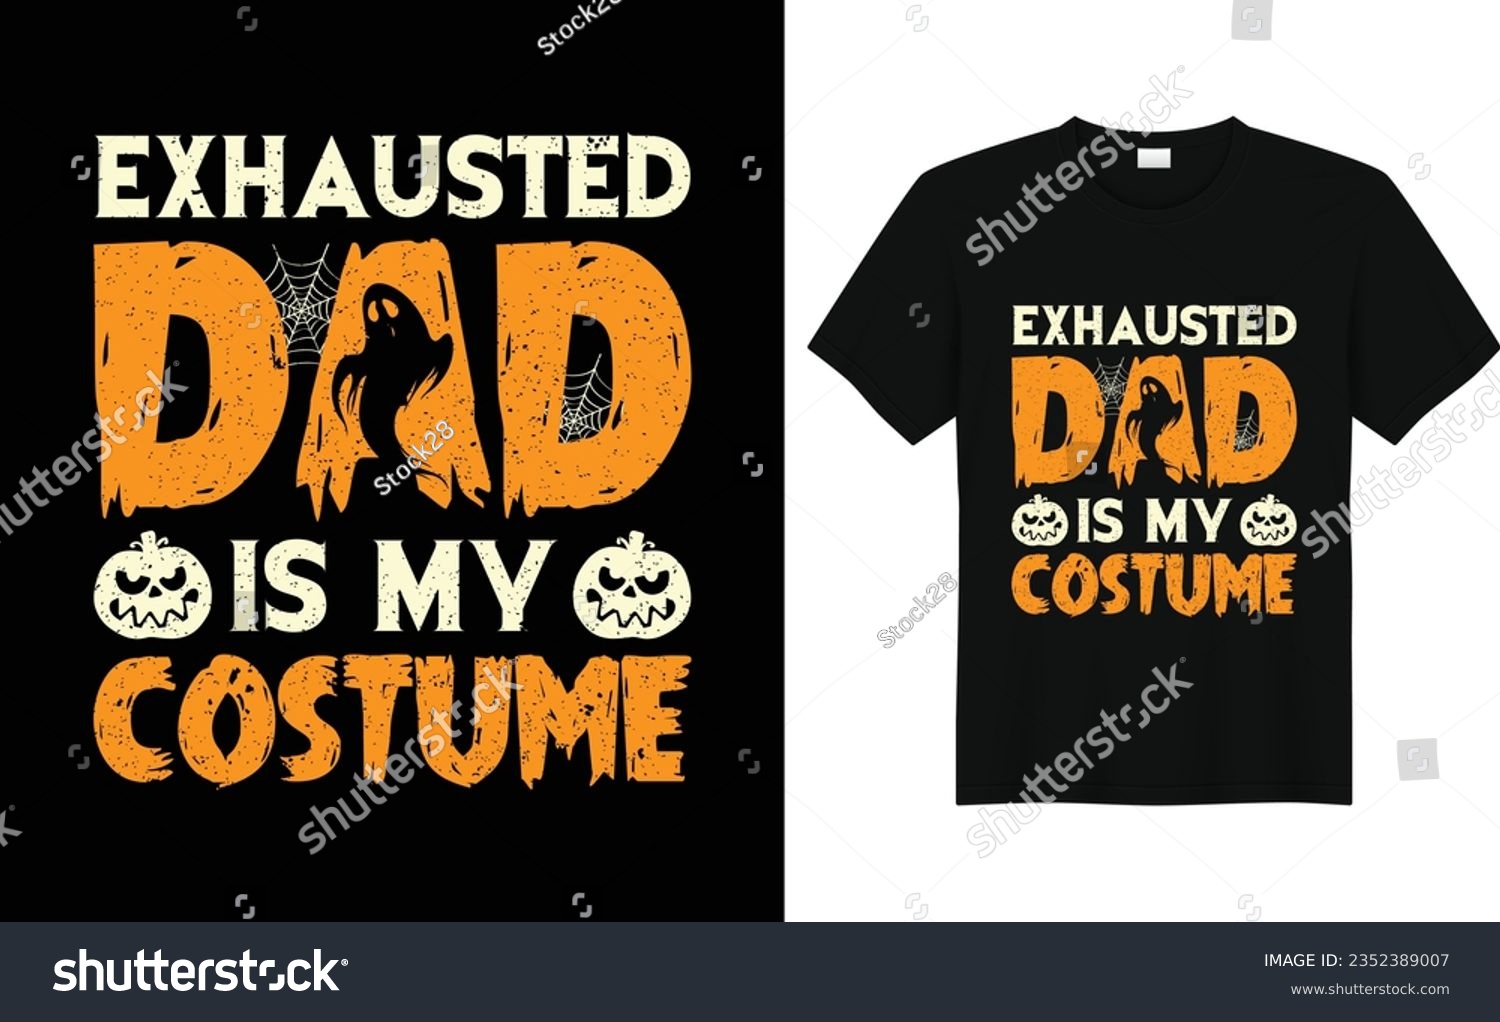 SVG of Exhausted Dad Is My Costume, Halloween Tees, Boo Halloween Shirt, Pumpkin, Spider, Halloween T-shirt, Retro groovy, Stay Spooky, Greeting Card, Poster, and Mug Design. svg